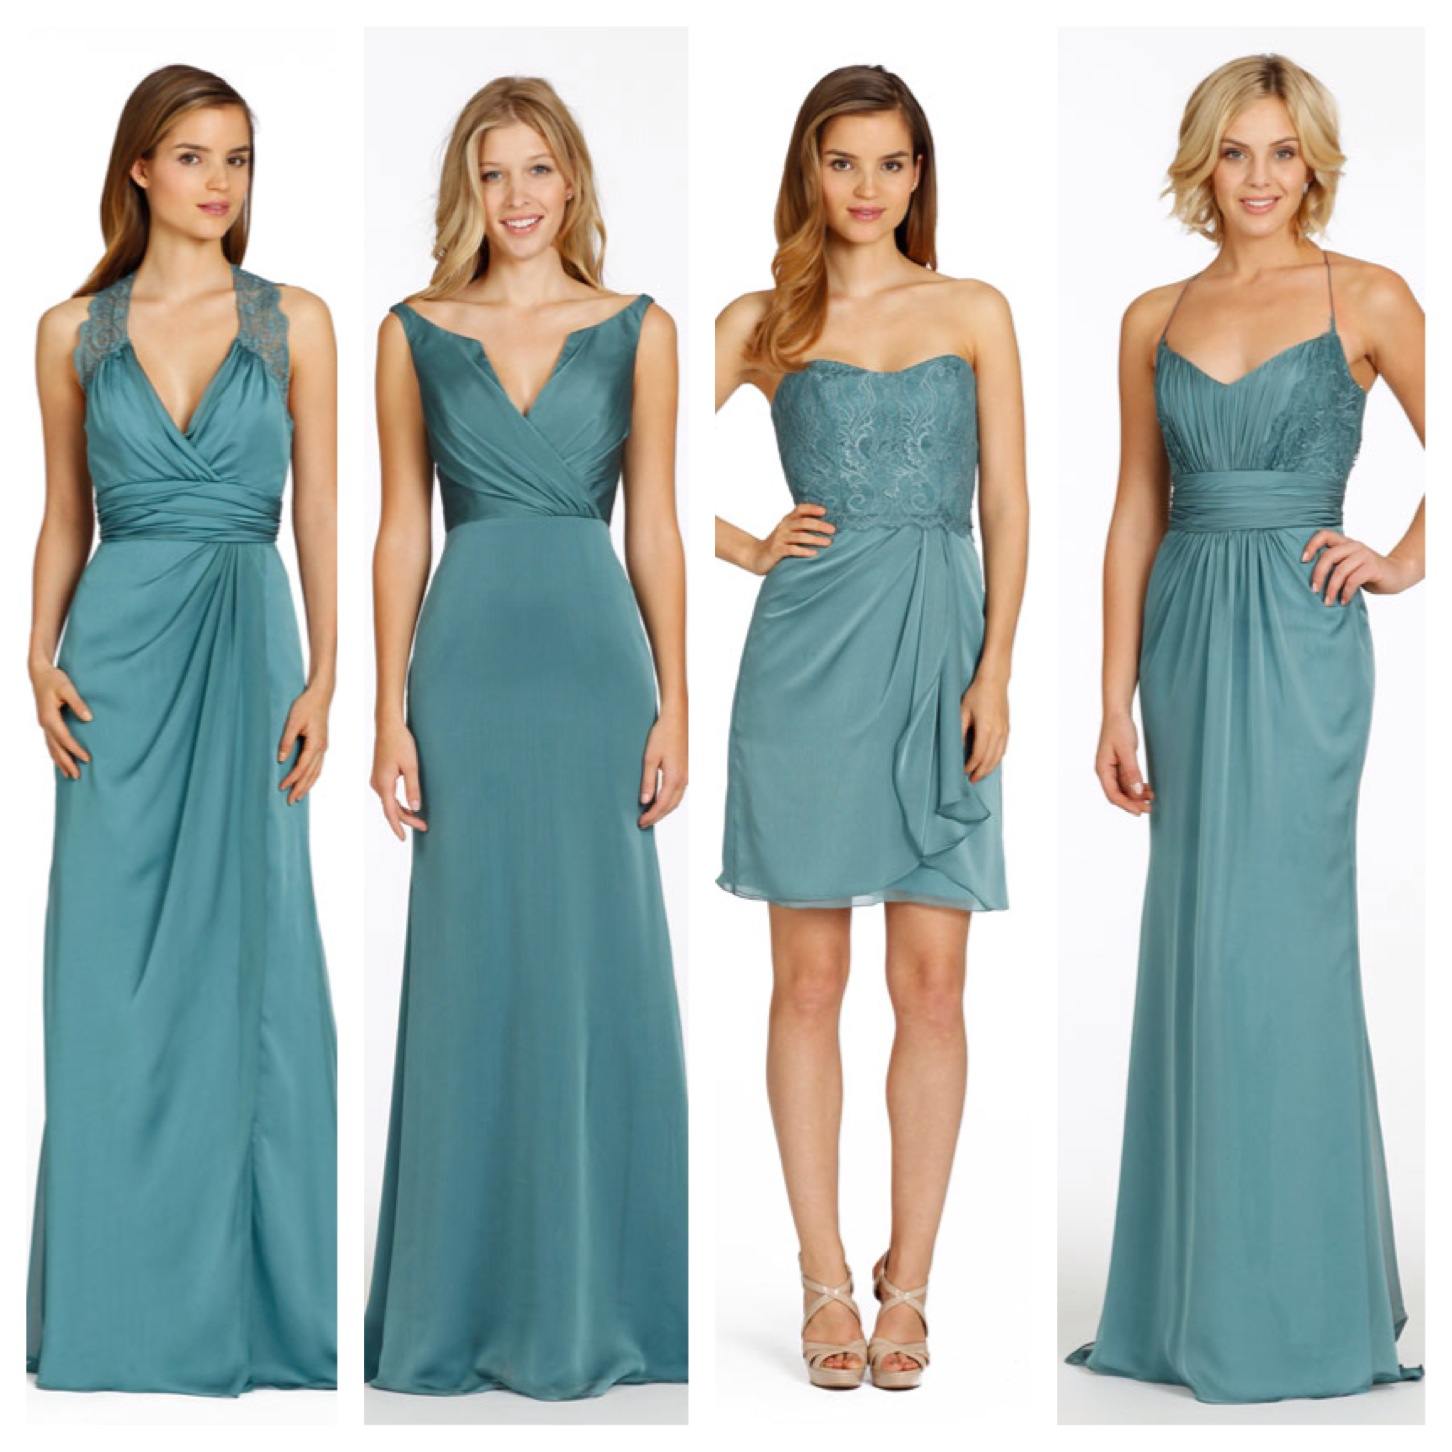 Happy St. Patrick's Day! | JLM Couture